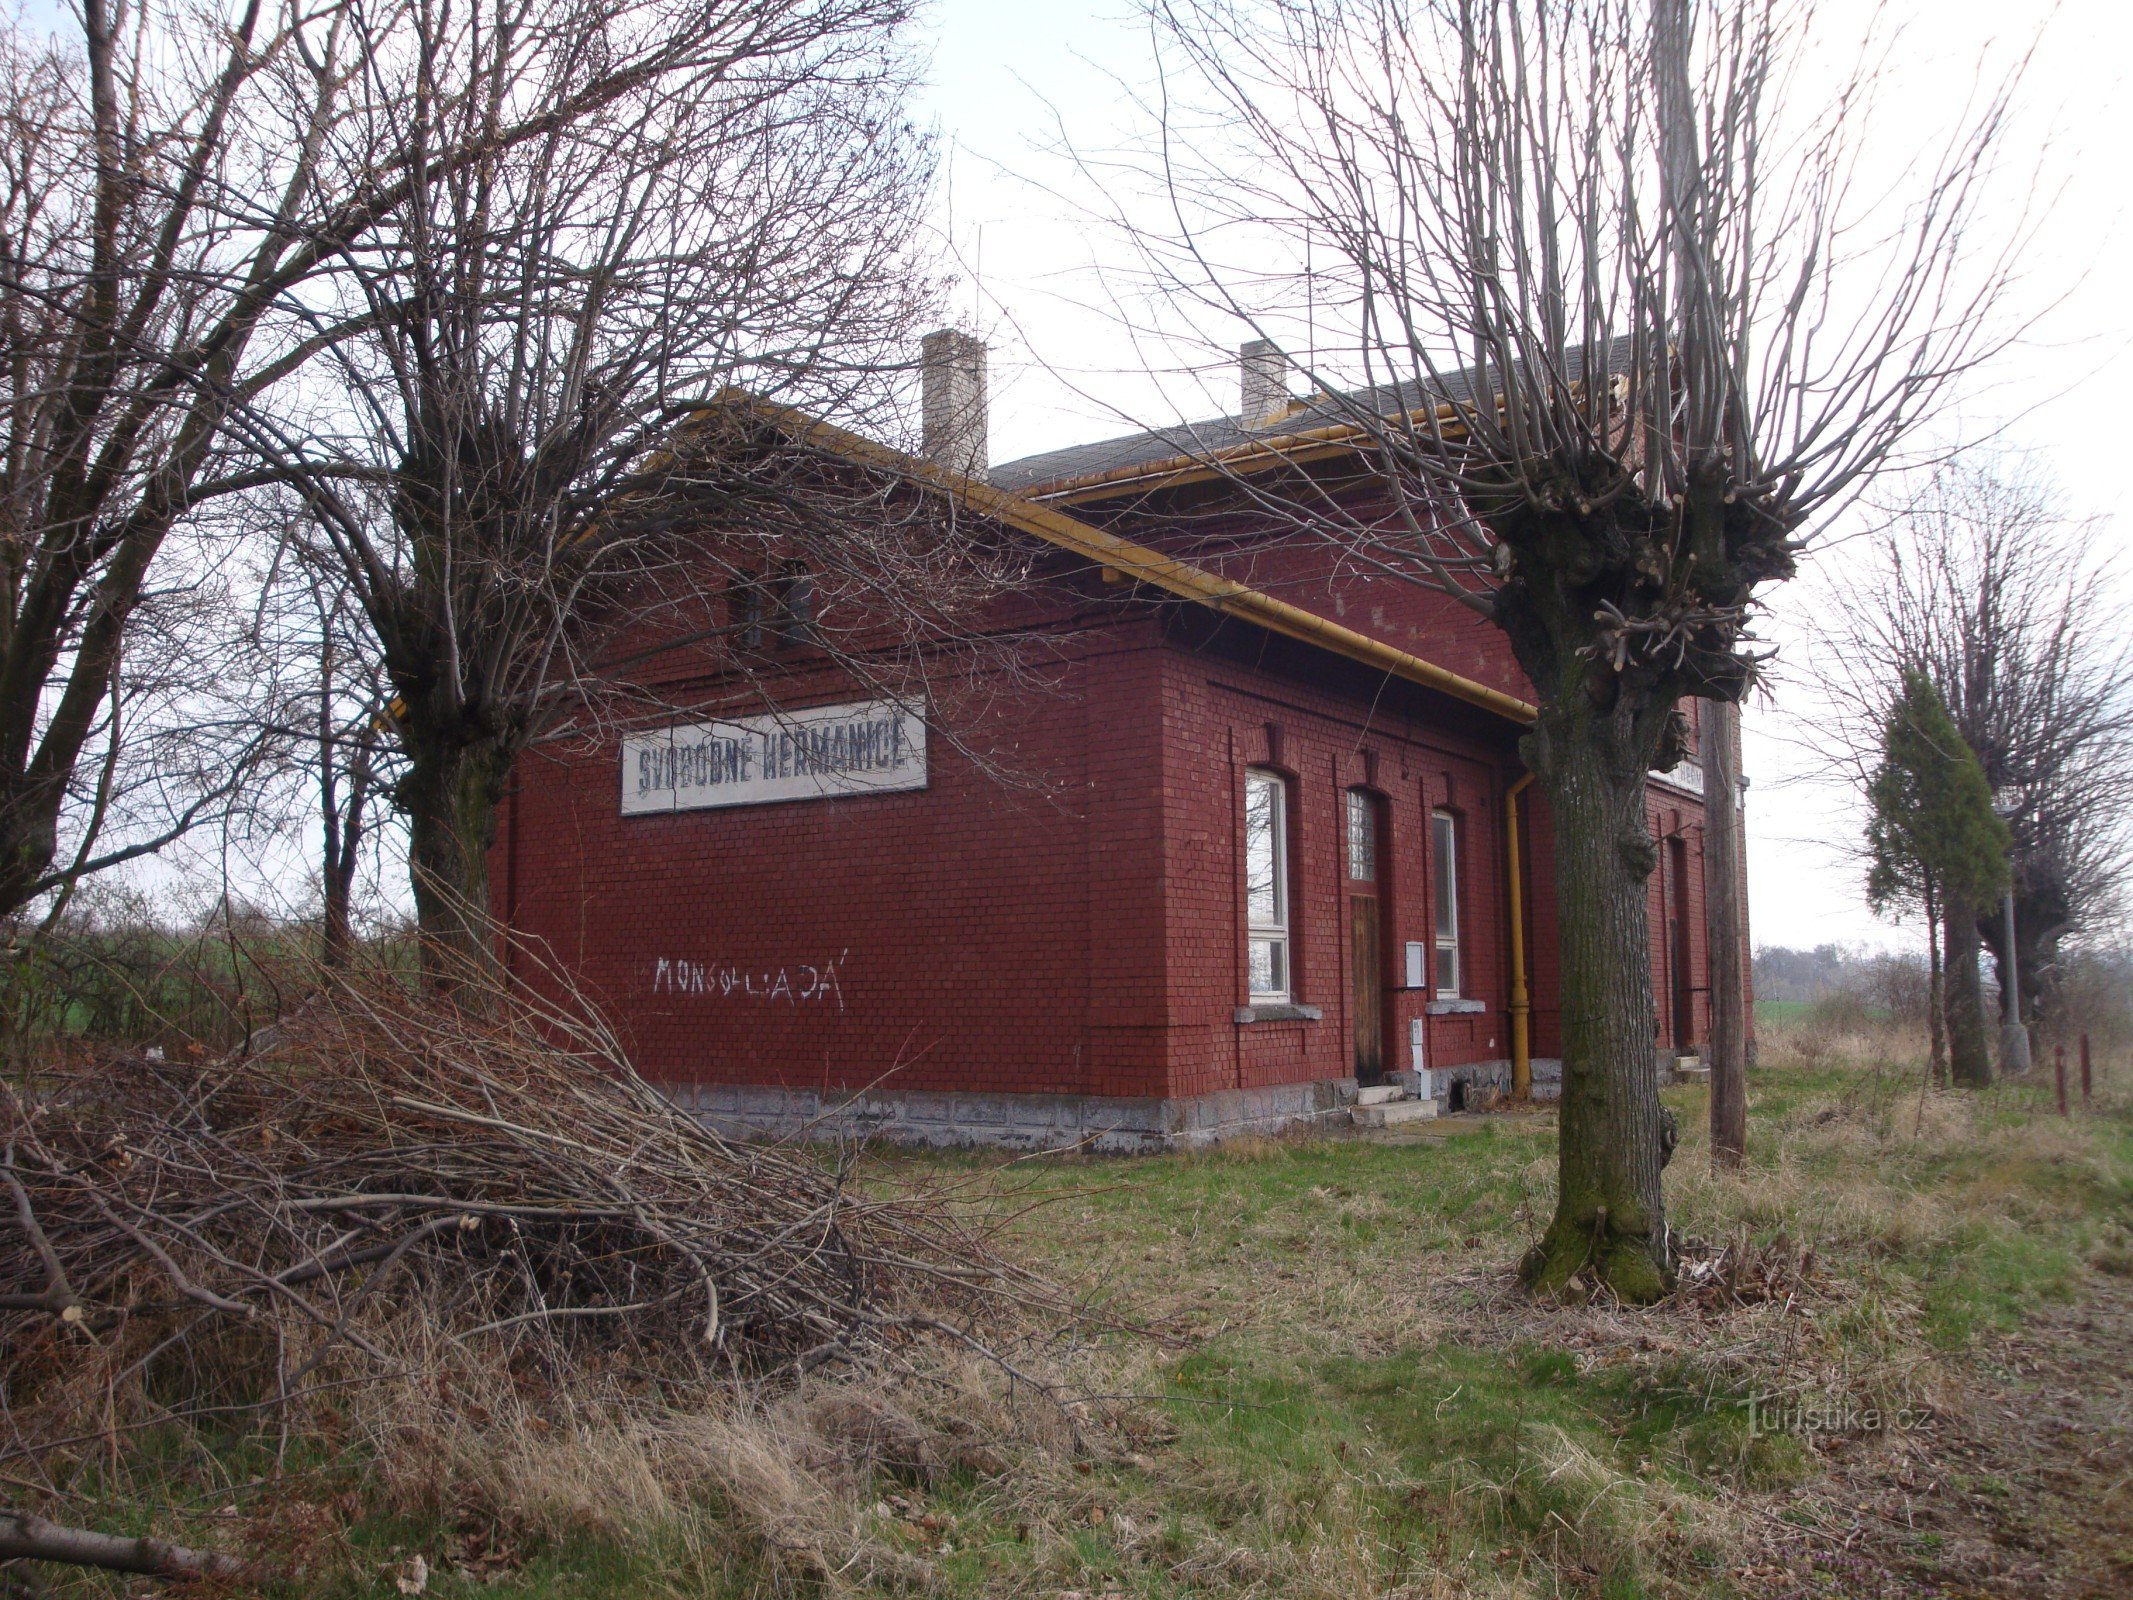 Former station building, view from the tracks